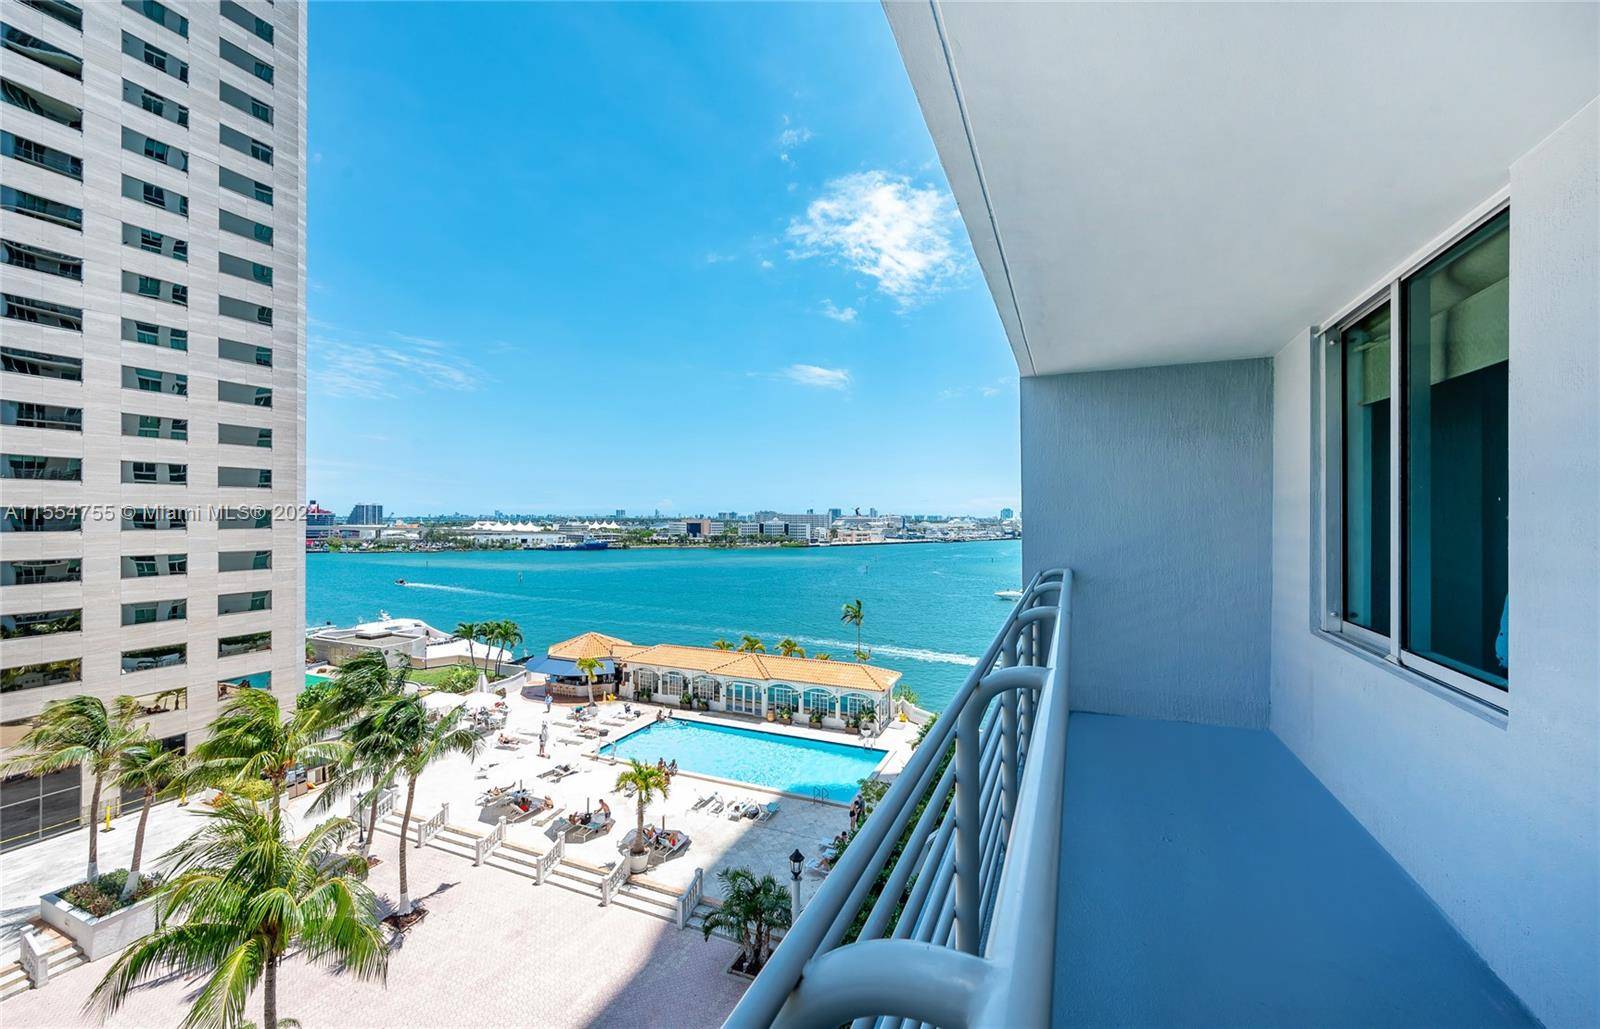 Don't miss this incredible opportunity to enjoy waterfront living in one of Miami's most desirable Bayfront buildings.